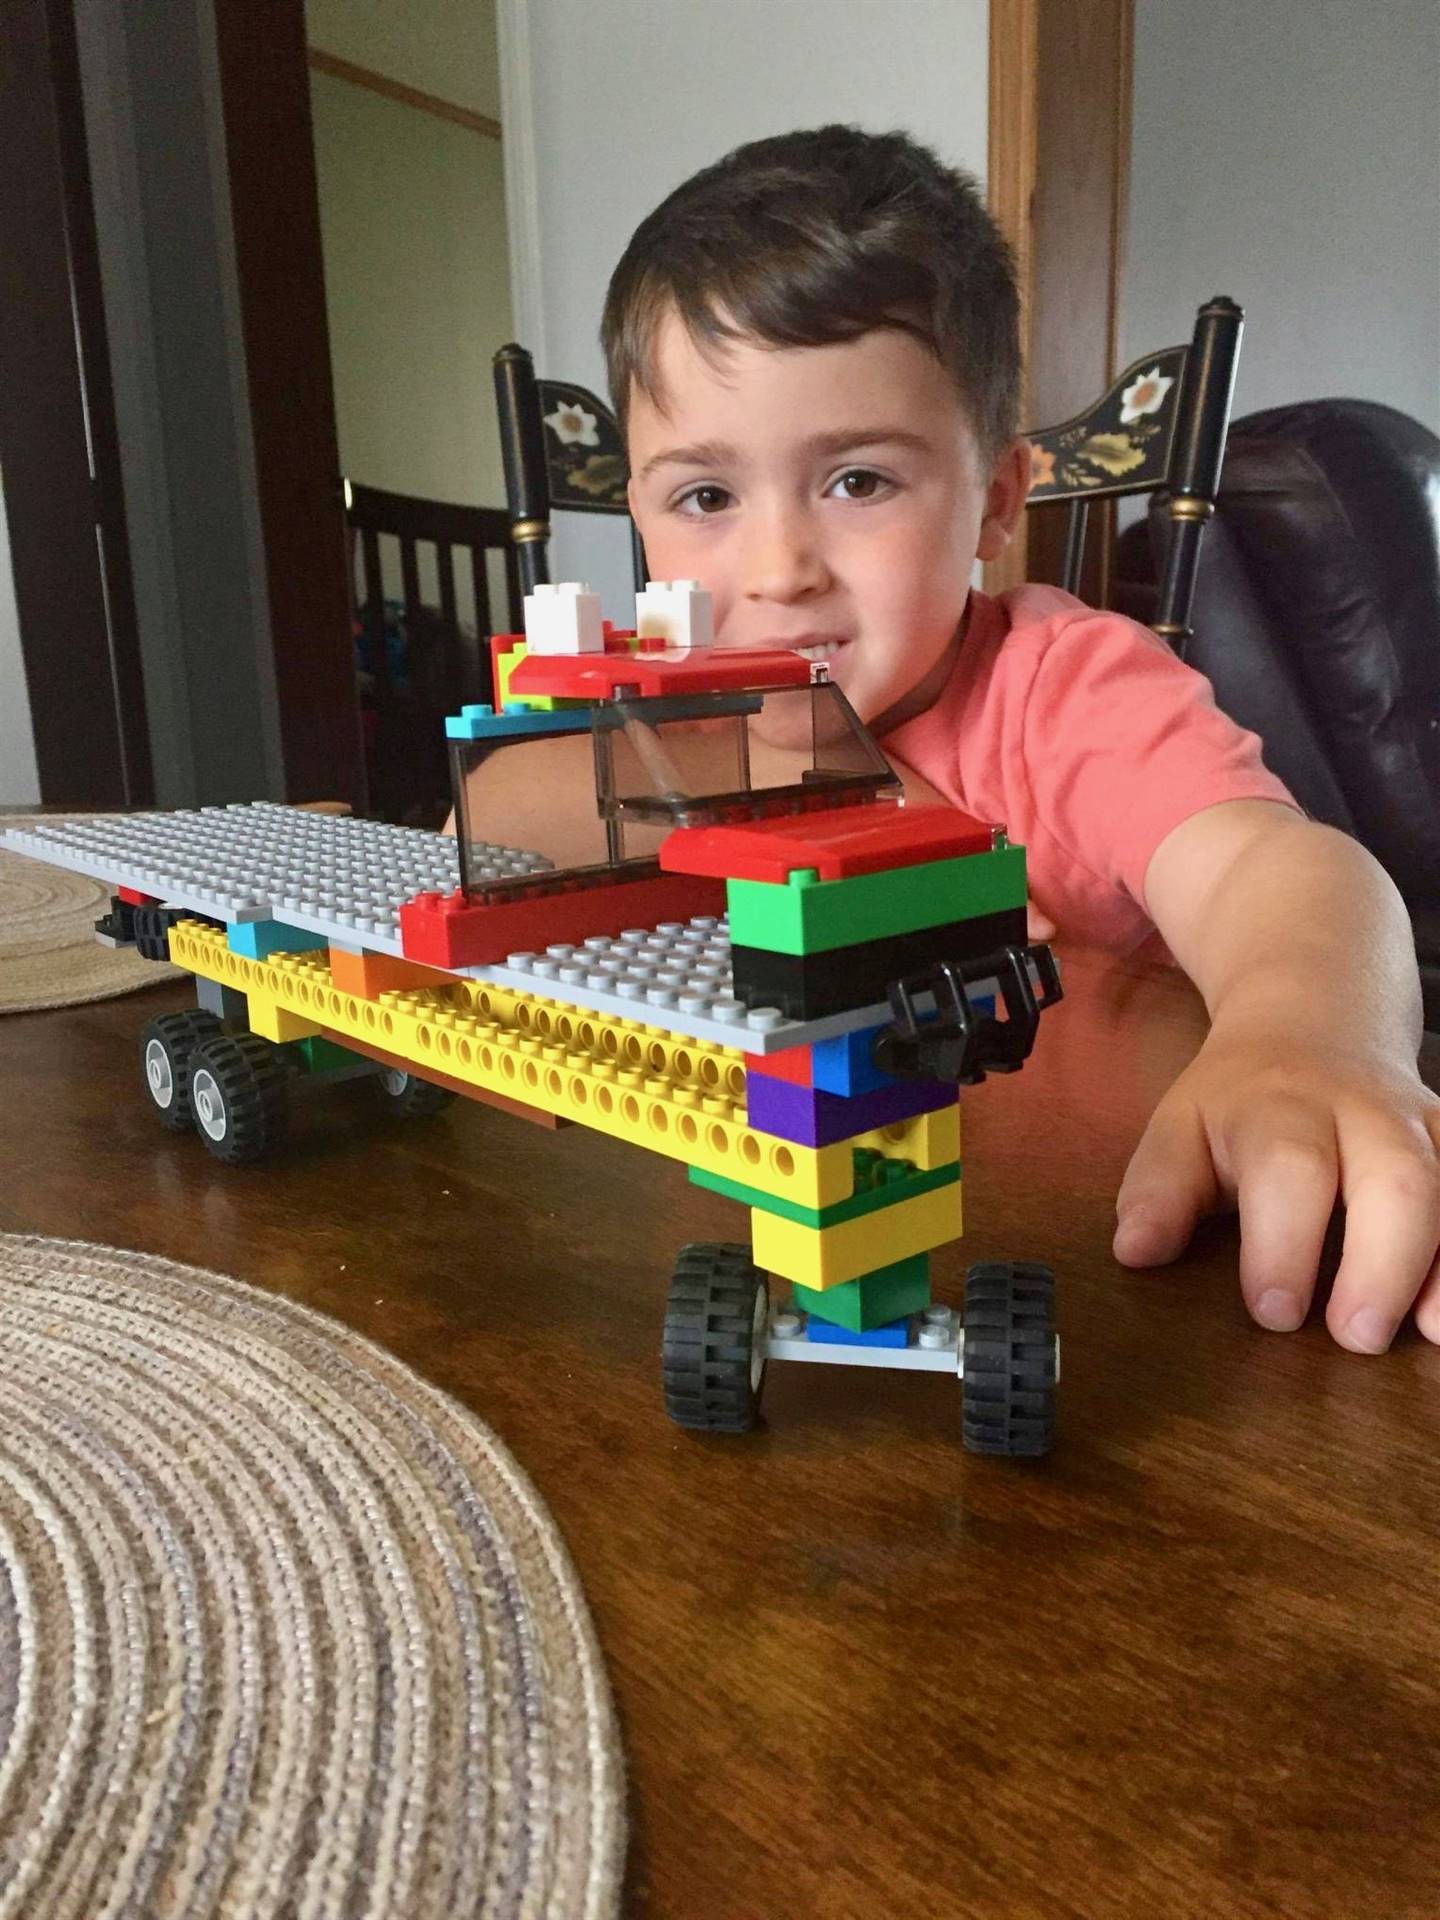 Student with lego truck